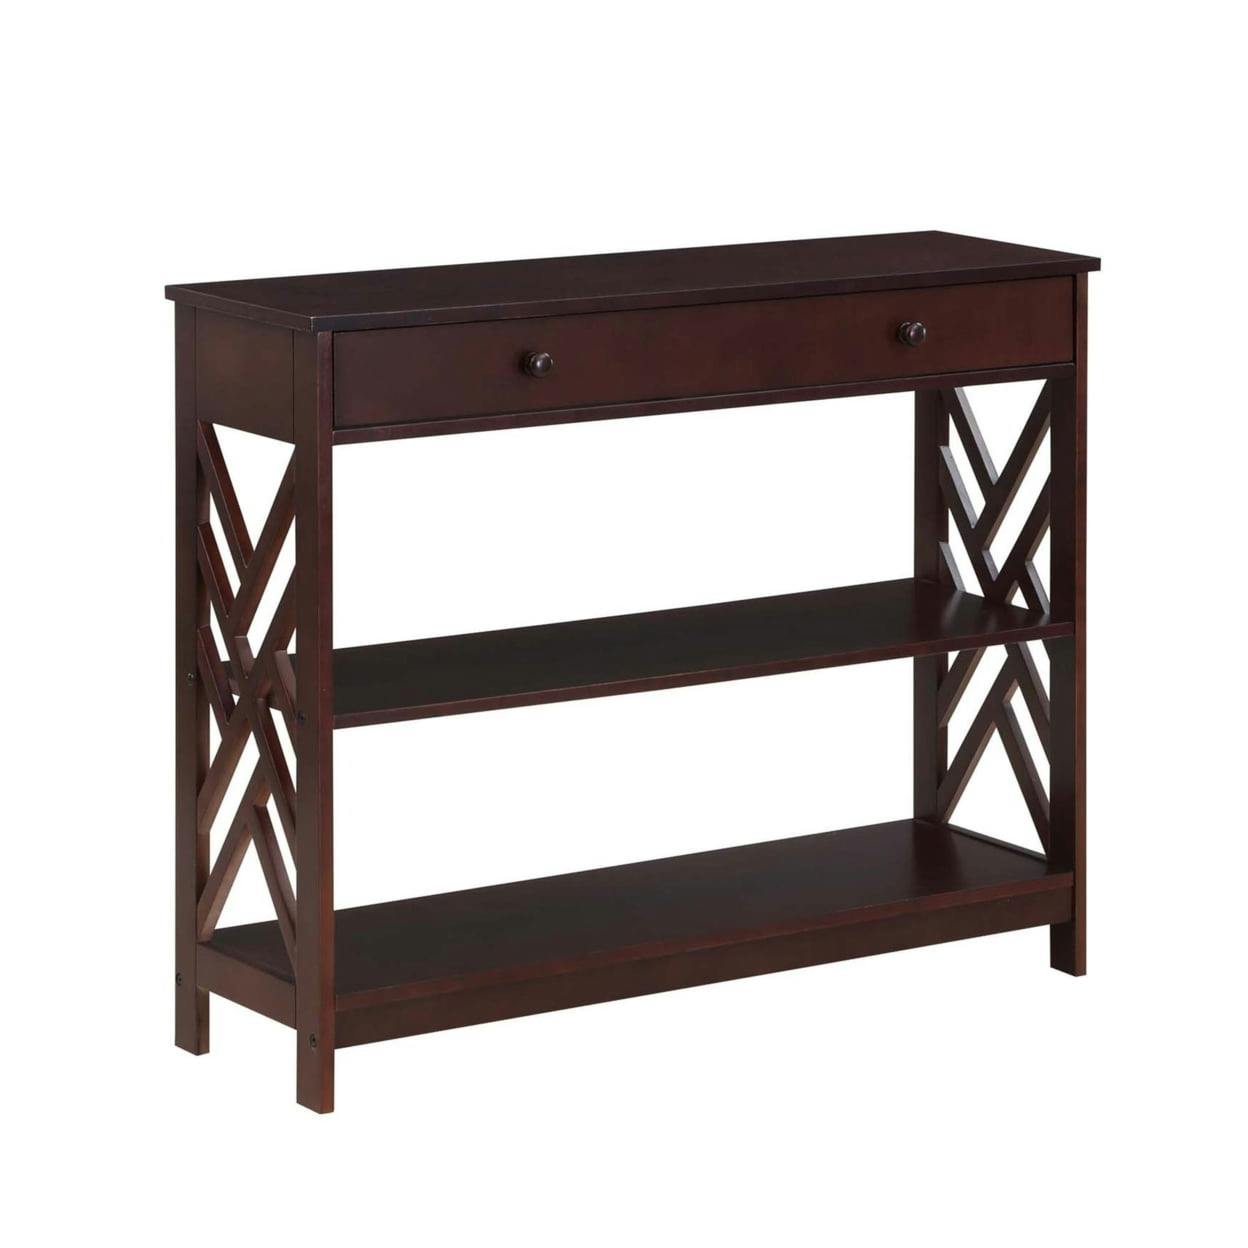 Espresso Titan Transitional Console Table with Storage